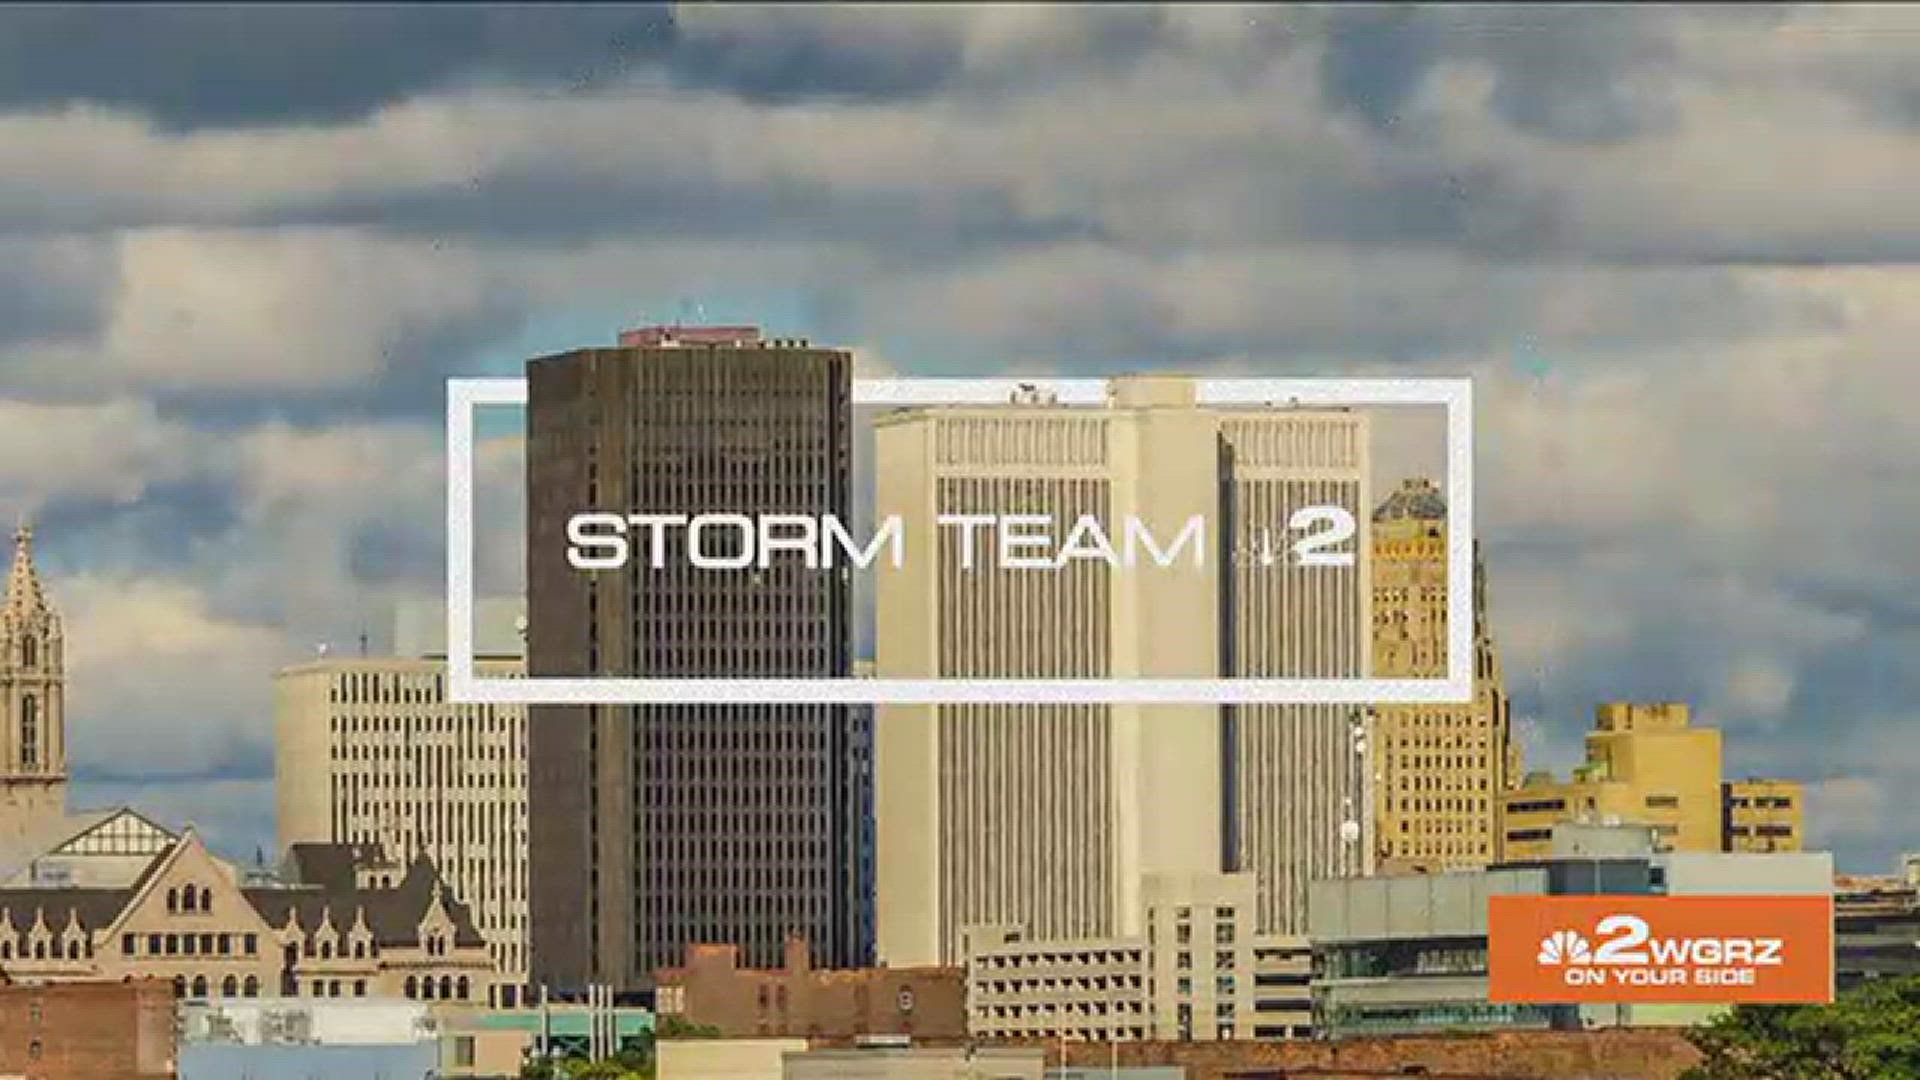 Storm Team 2 weekend weather with Patrick Hammer.